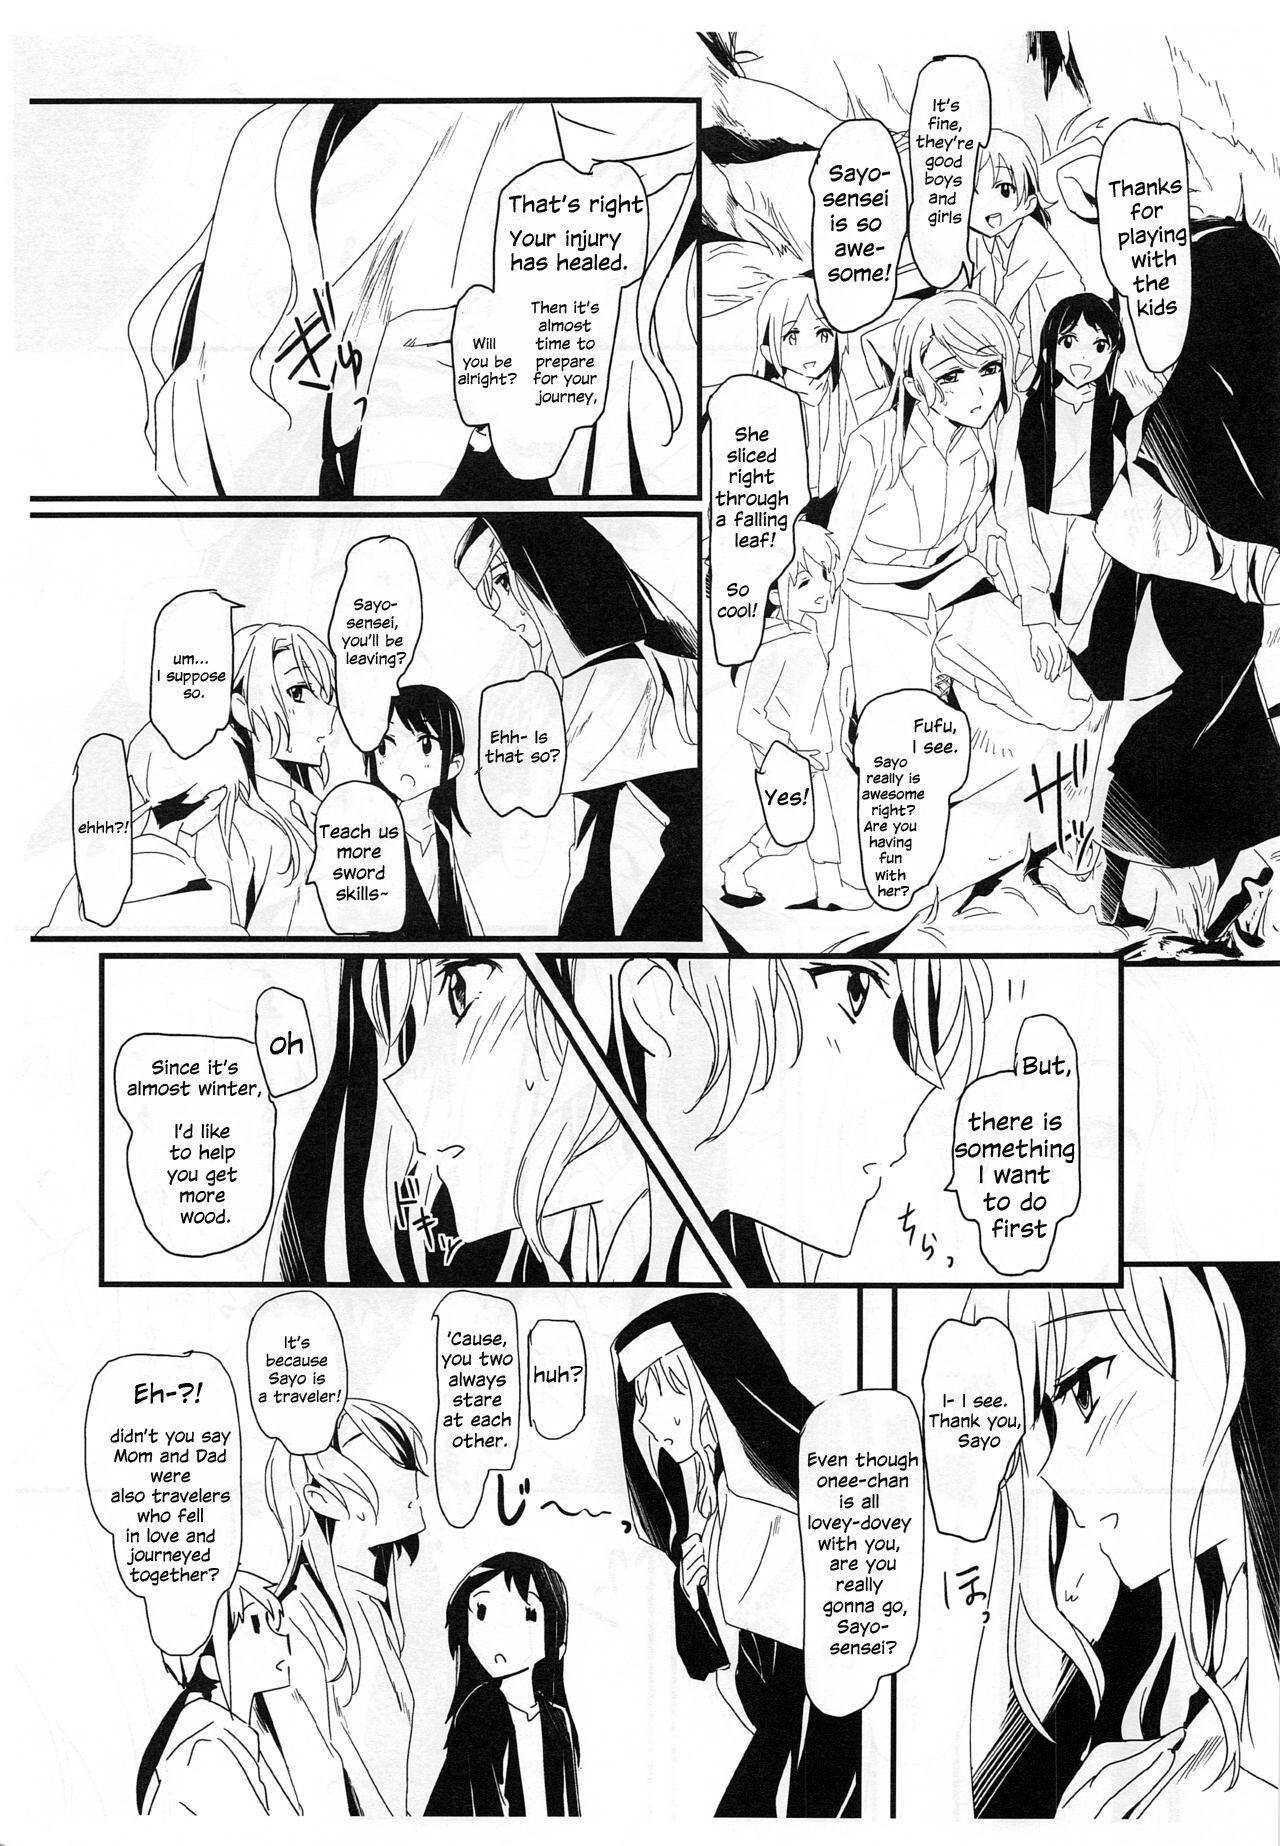 Wet Cunt you make me! - Bang dream Thailand - Page 8